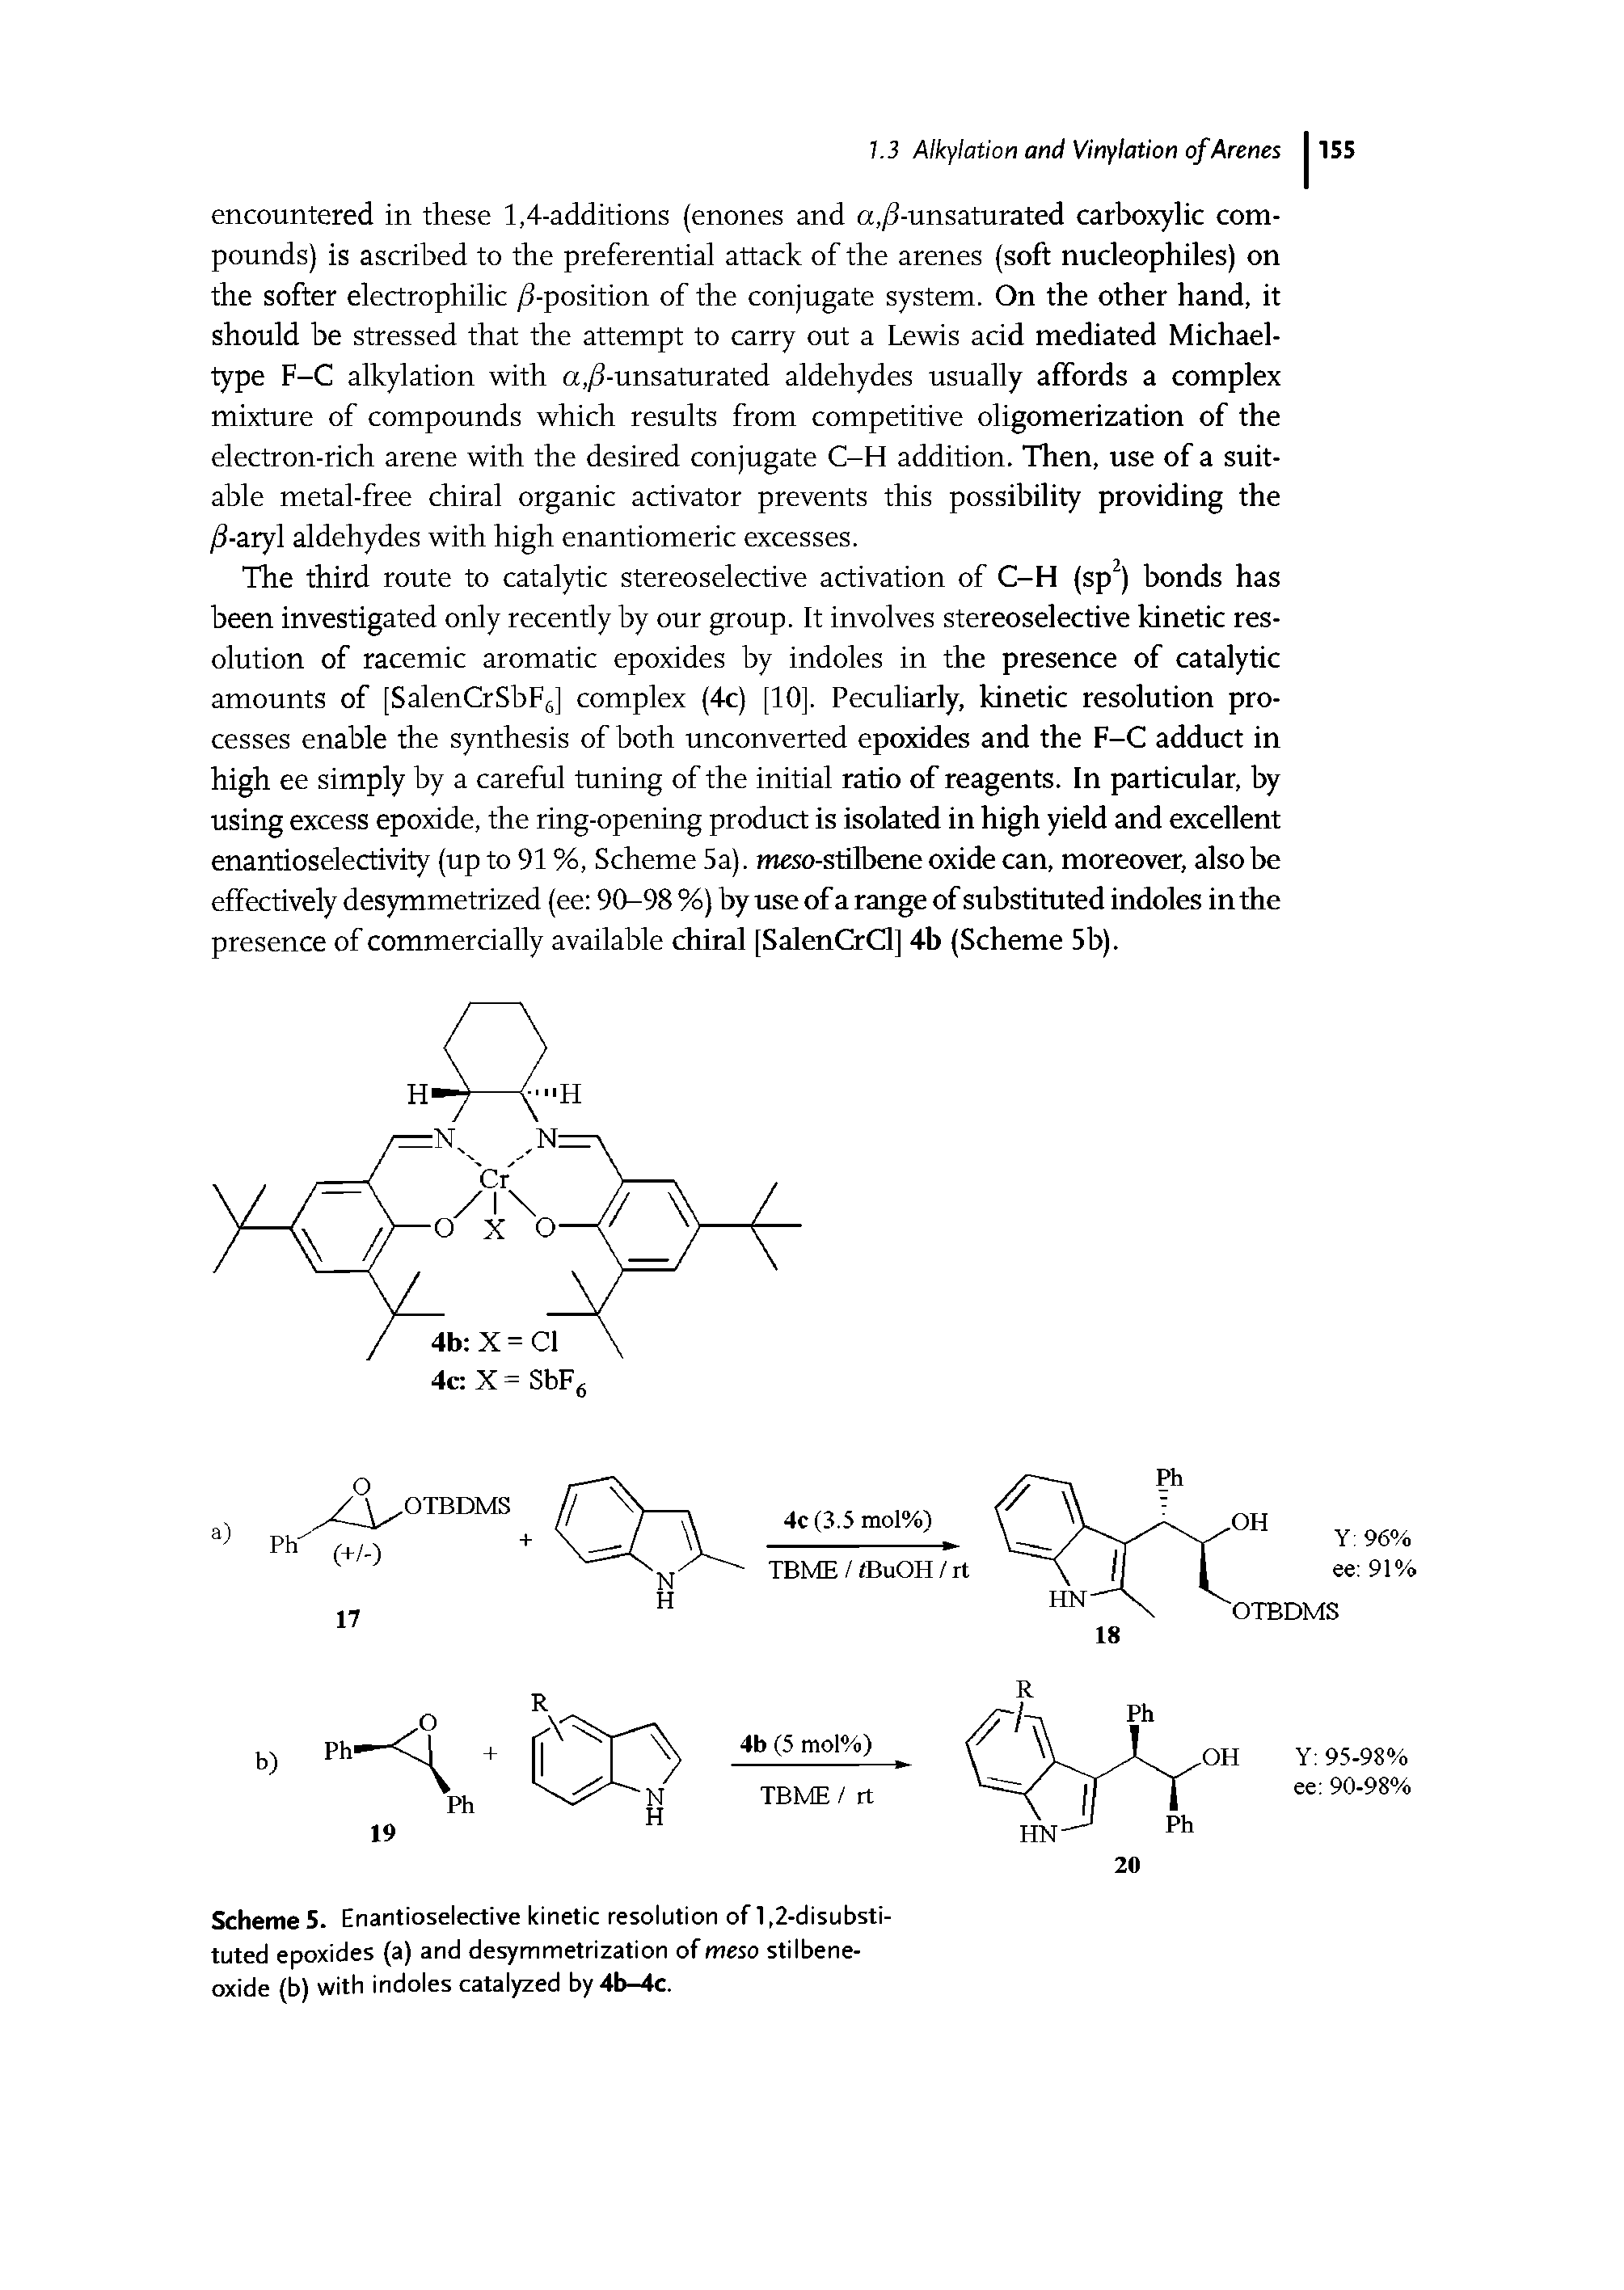 Scheme 5. Enantioselective kinetic resolution of 1,2-disubsti-tuted epoxides (a) and desymmetrization of meso stilbene-oxide (b) with indoles catalyzed by4b-4c.